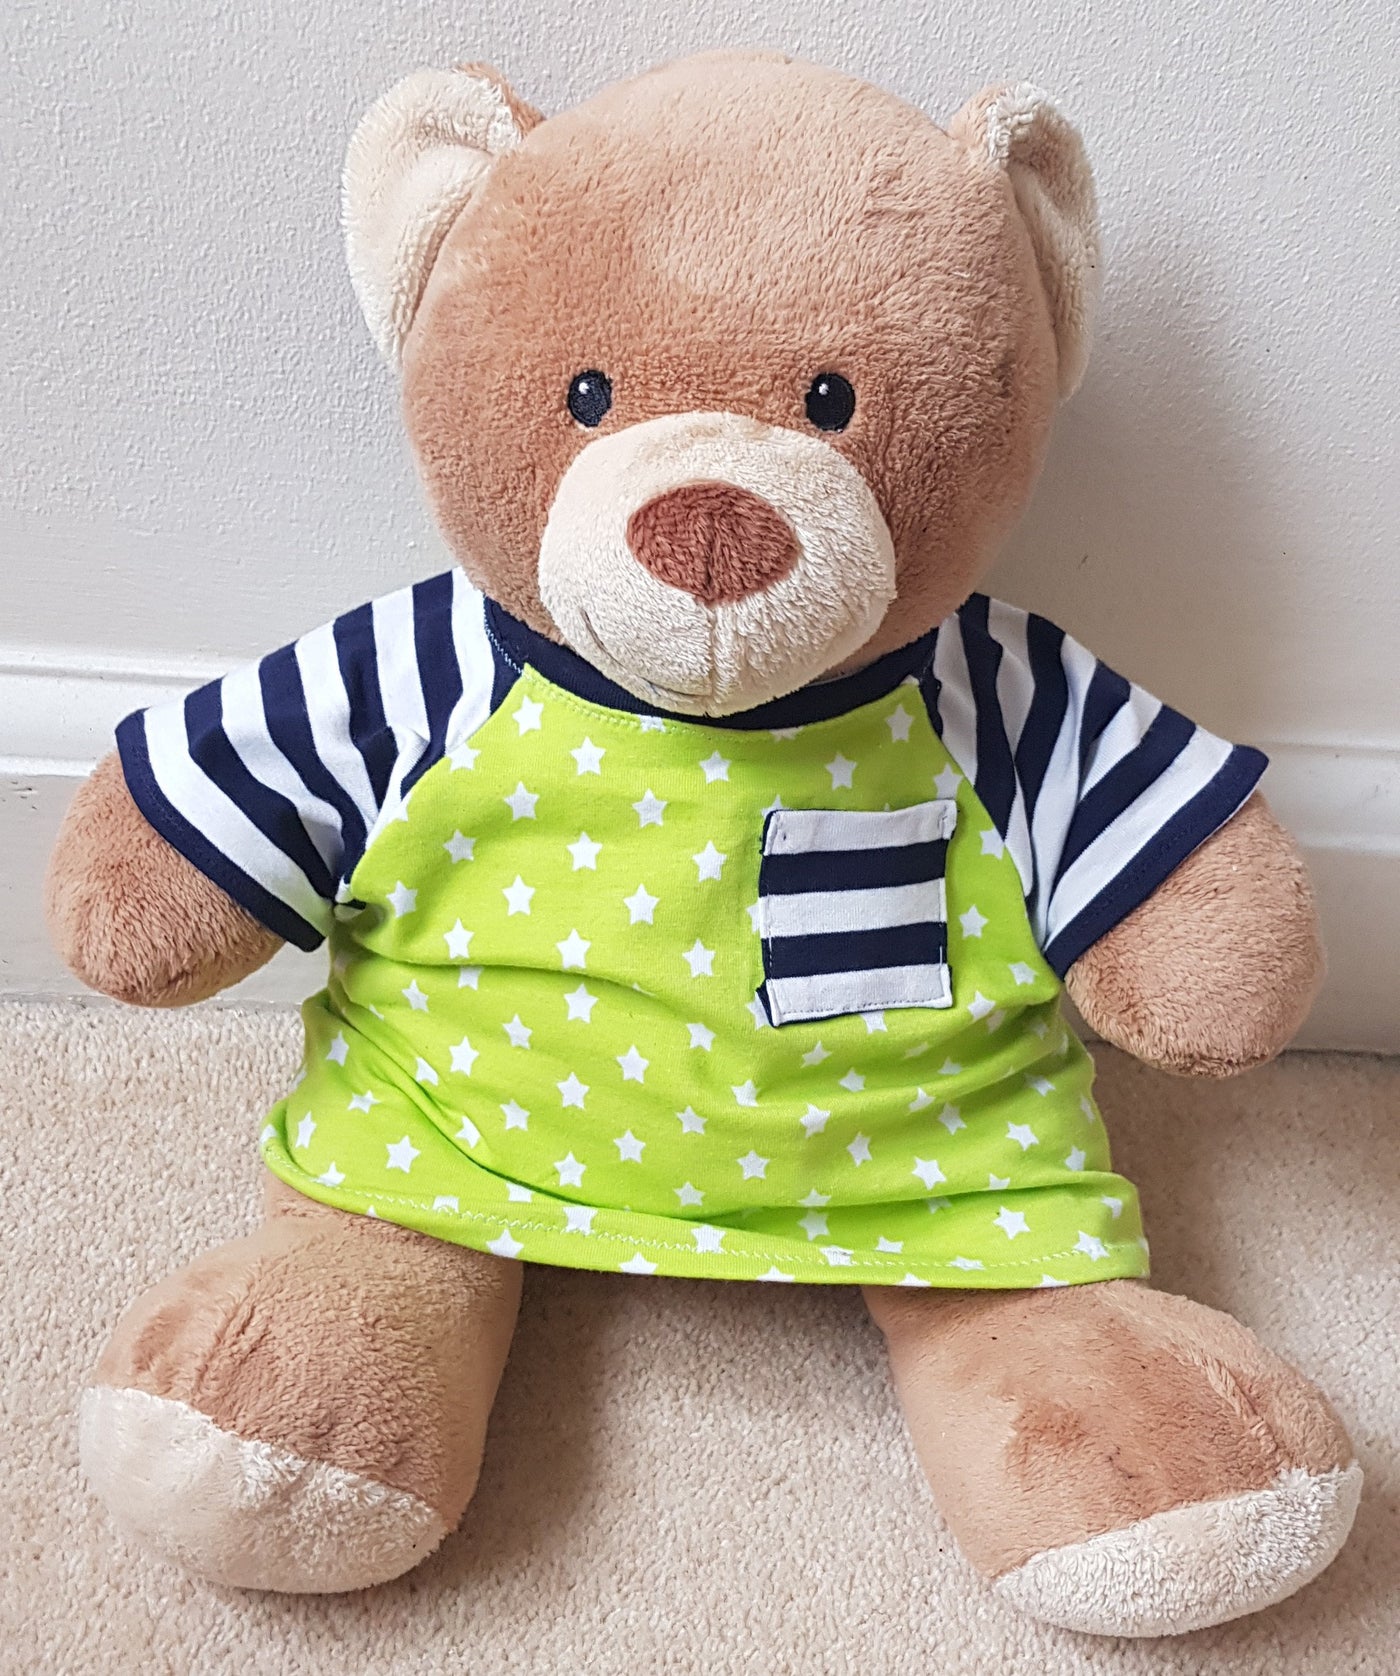 Teddy Bear Tee T-shirt/T-shirt dress clothes sewing pattern instant download PDF Instructions: for build a bear/15 inch bear